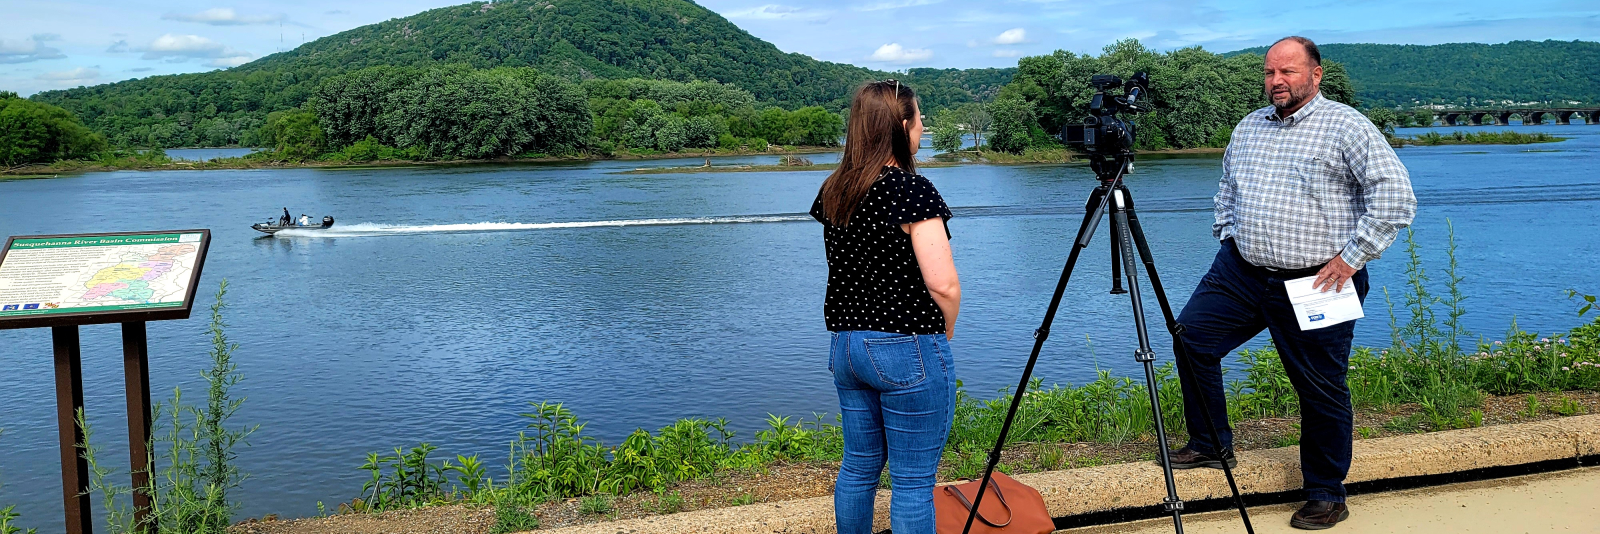 Interview by the Susquehanna River